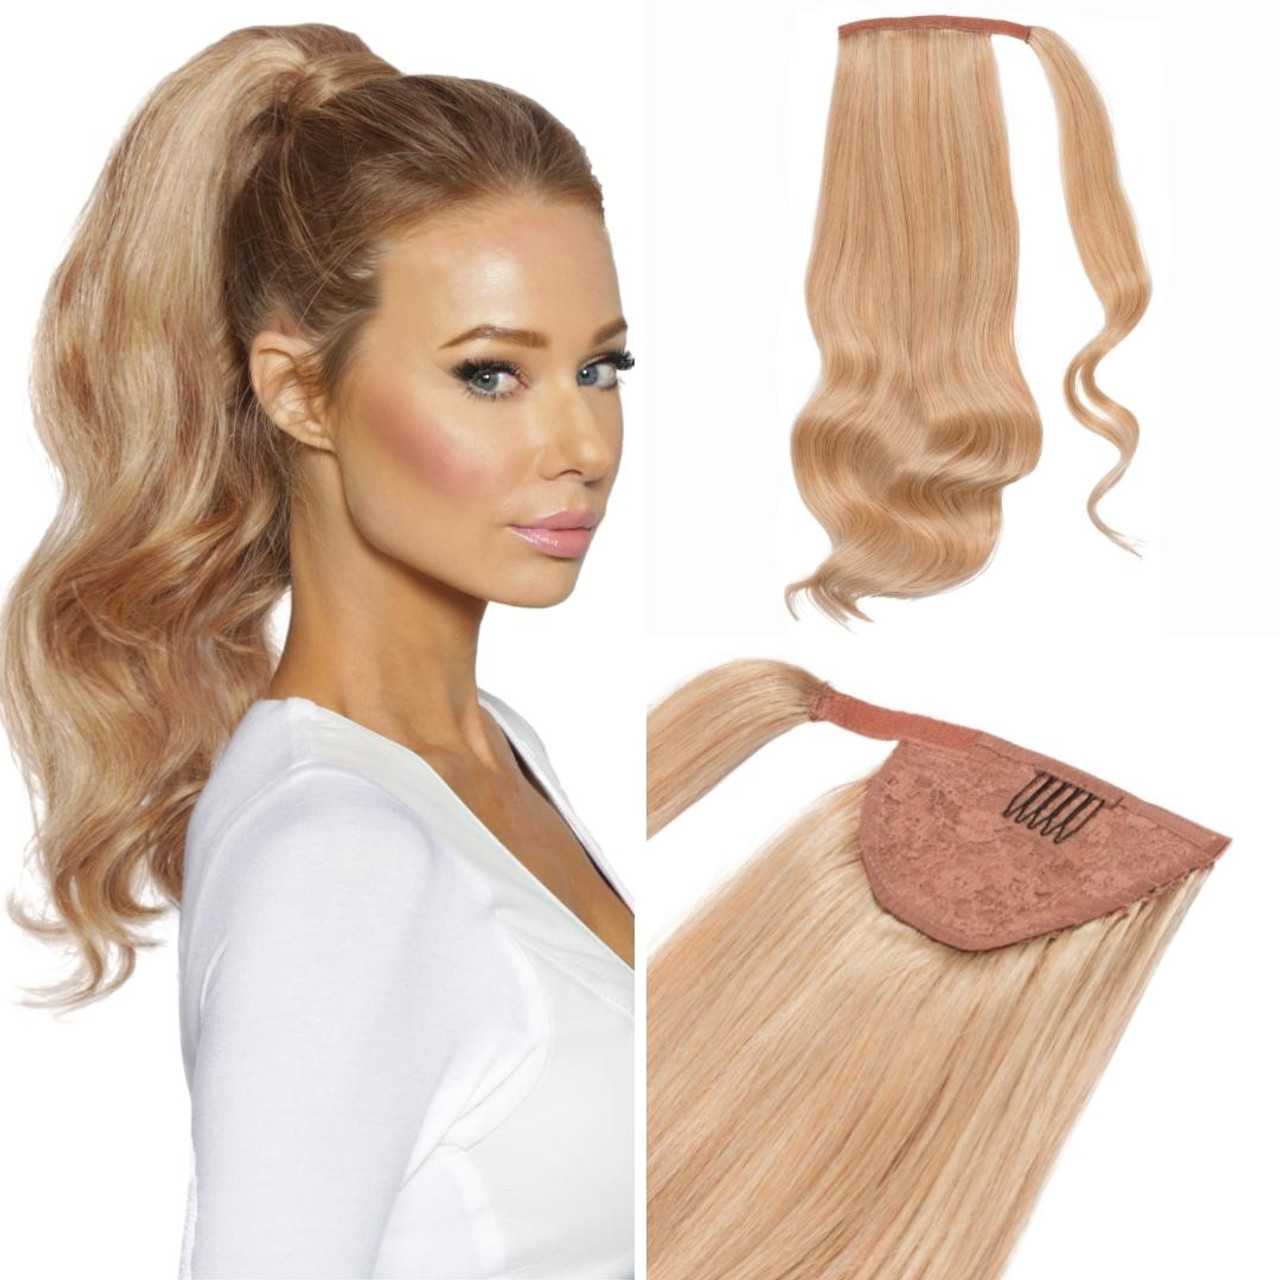 Joann - Clip-In Ponytail Extension S01: Classic Blonde